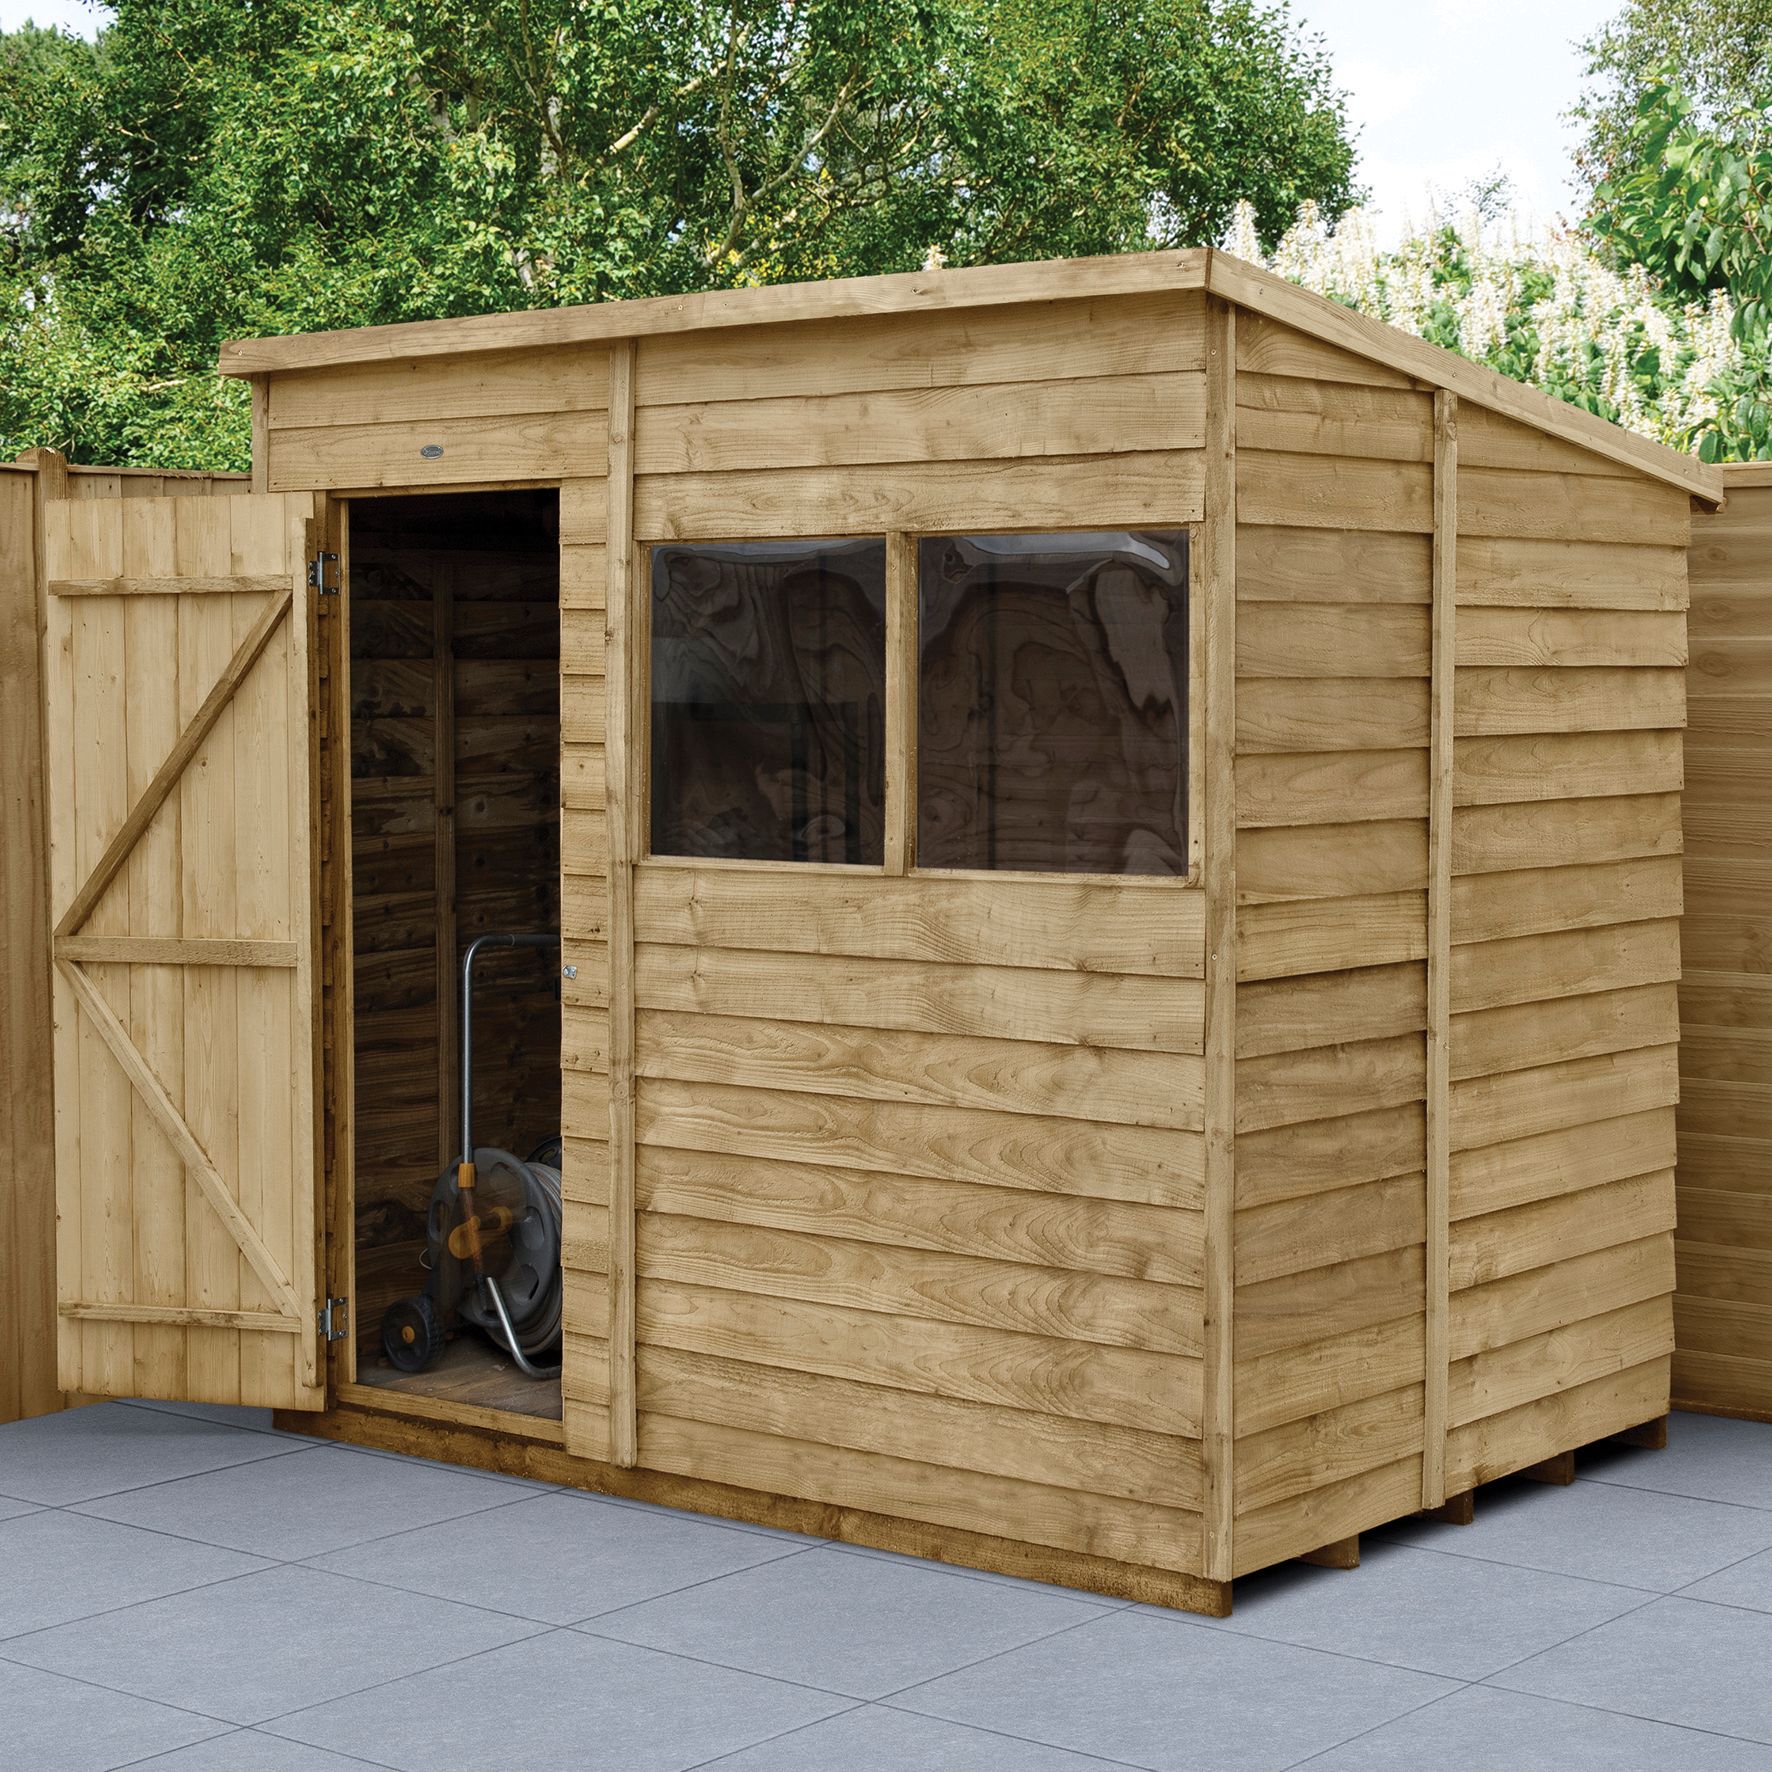 Image of Forest Garden 7 x 5ft Overlap Pent Pressure Treated Potting Shed